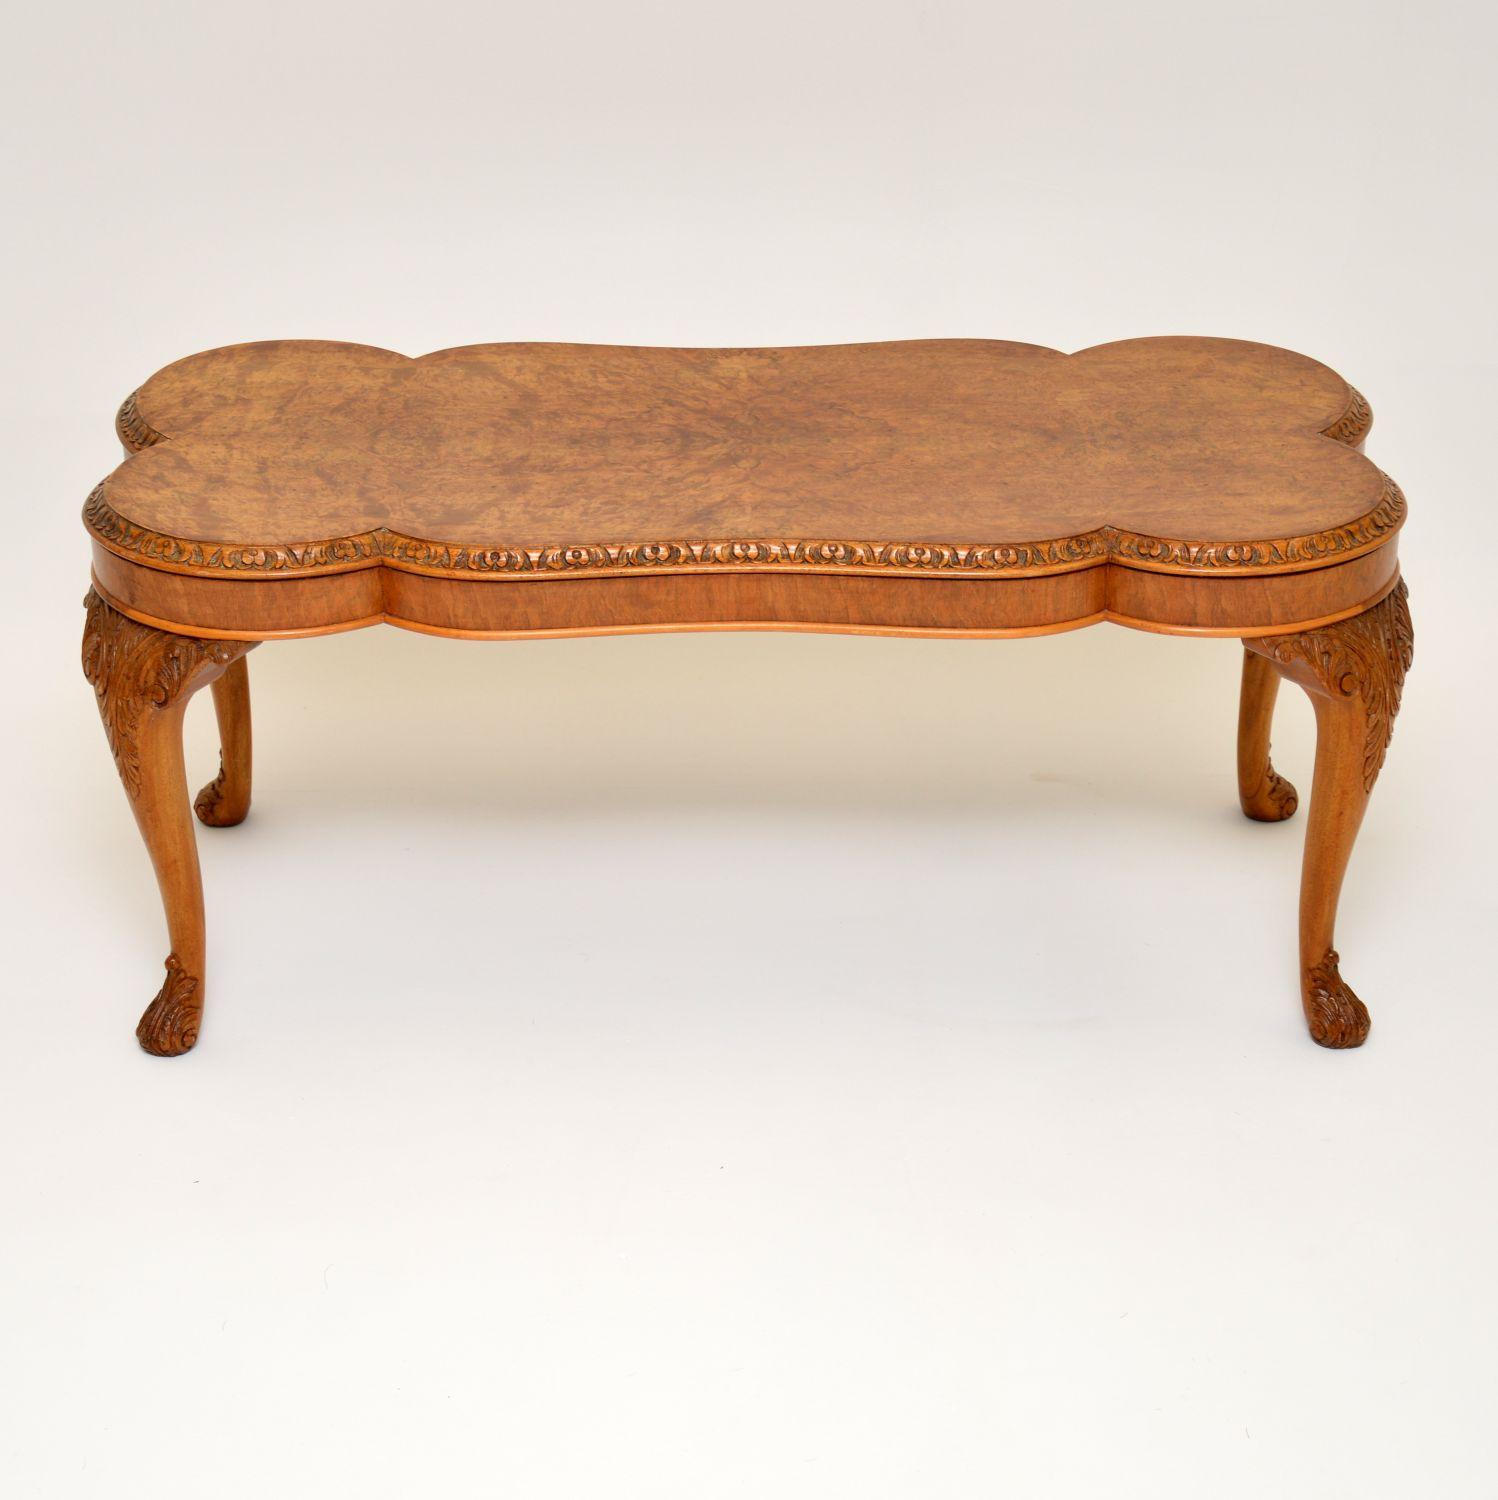 This antique walnut coffee table has a beautifully shaped and patterned burr walnut top with a carved edge. It’s in excellent condition having just been French polished to a high standard and dates to circa 1930s period. The legs are sold walnut and